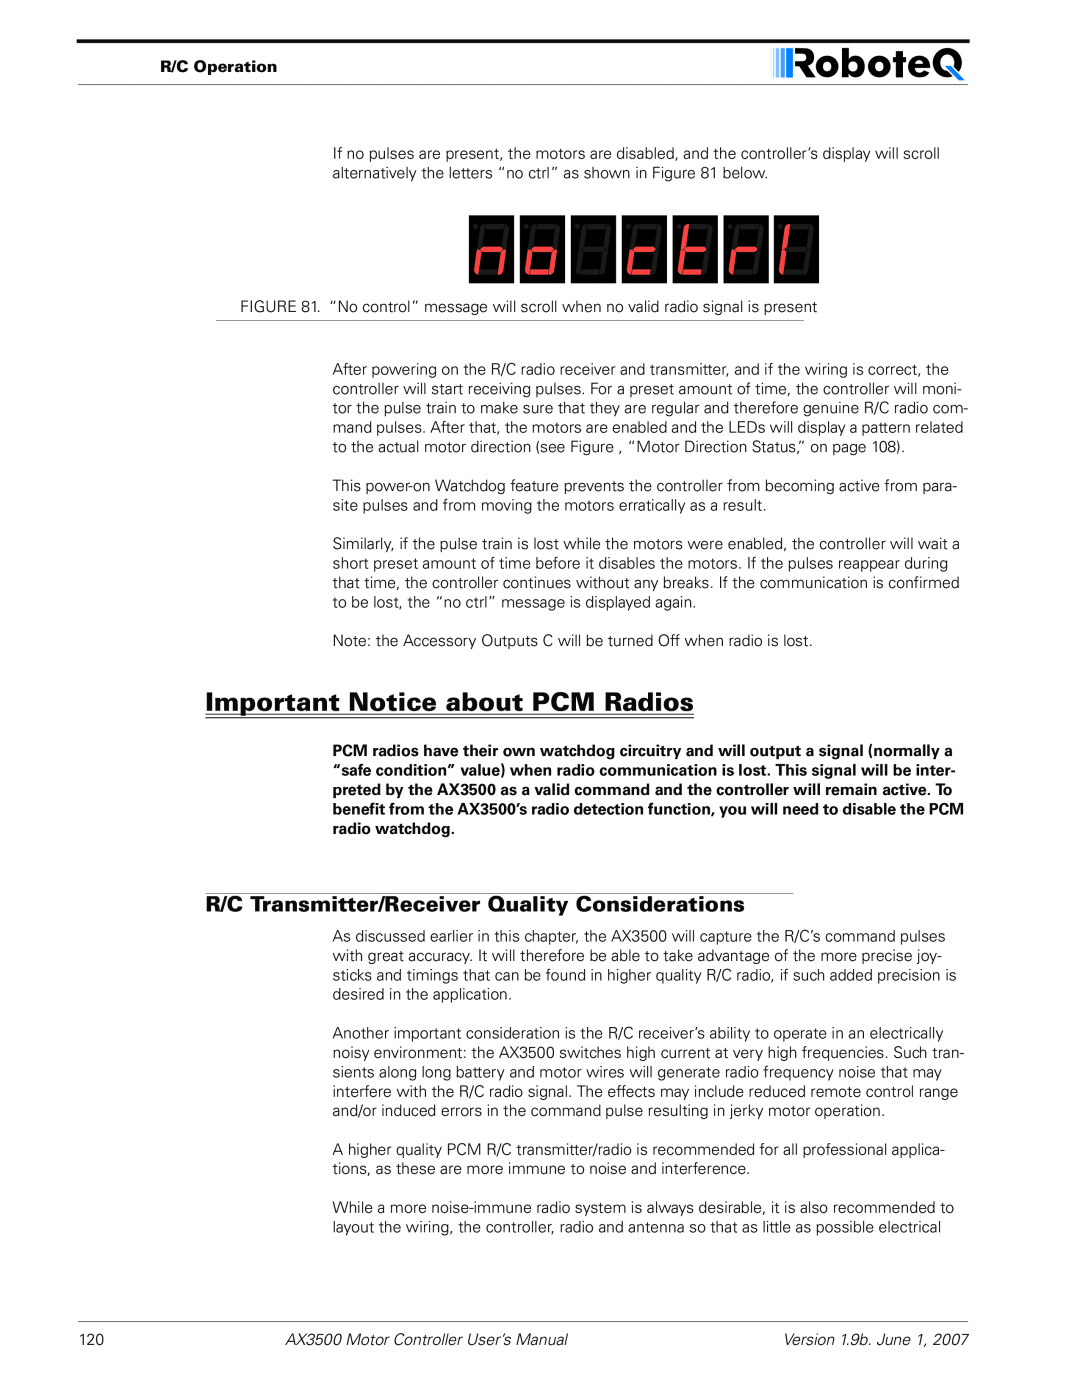 RoboteQ AX3500 Important Notice about PCM Radios, R/C Transmitter/Receiver Quality Considerations, R/C Operation 